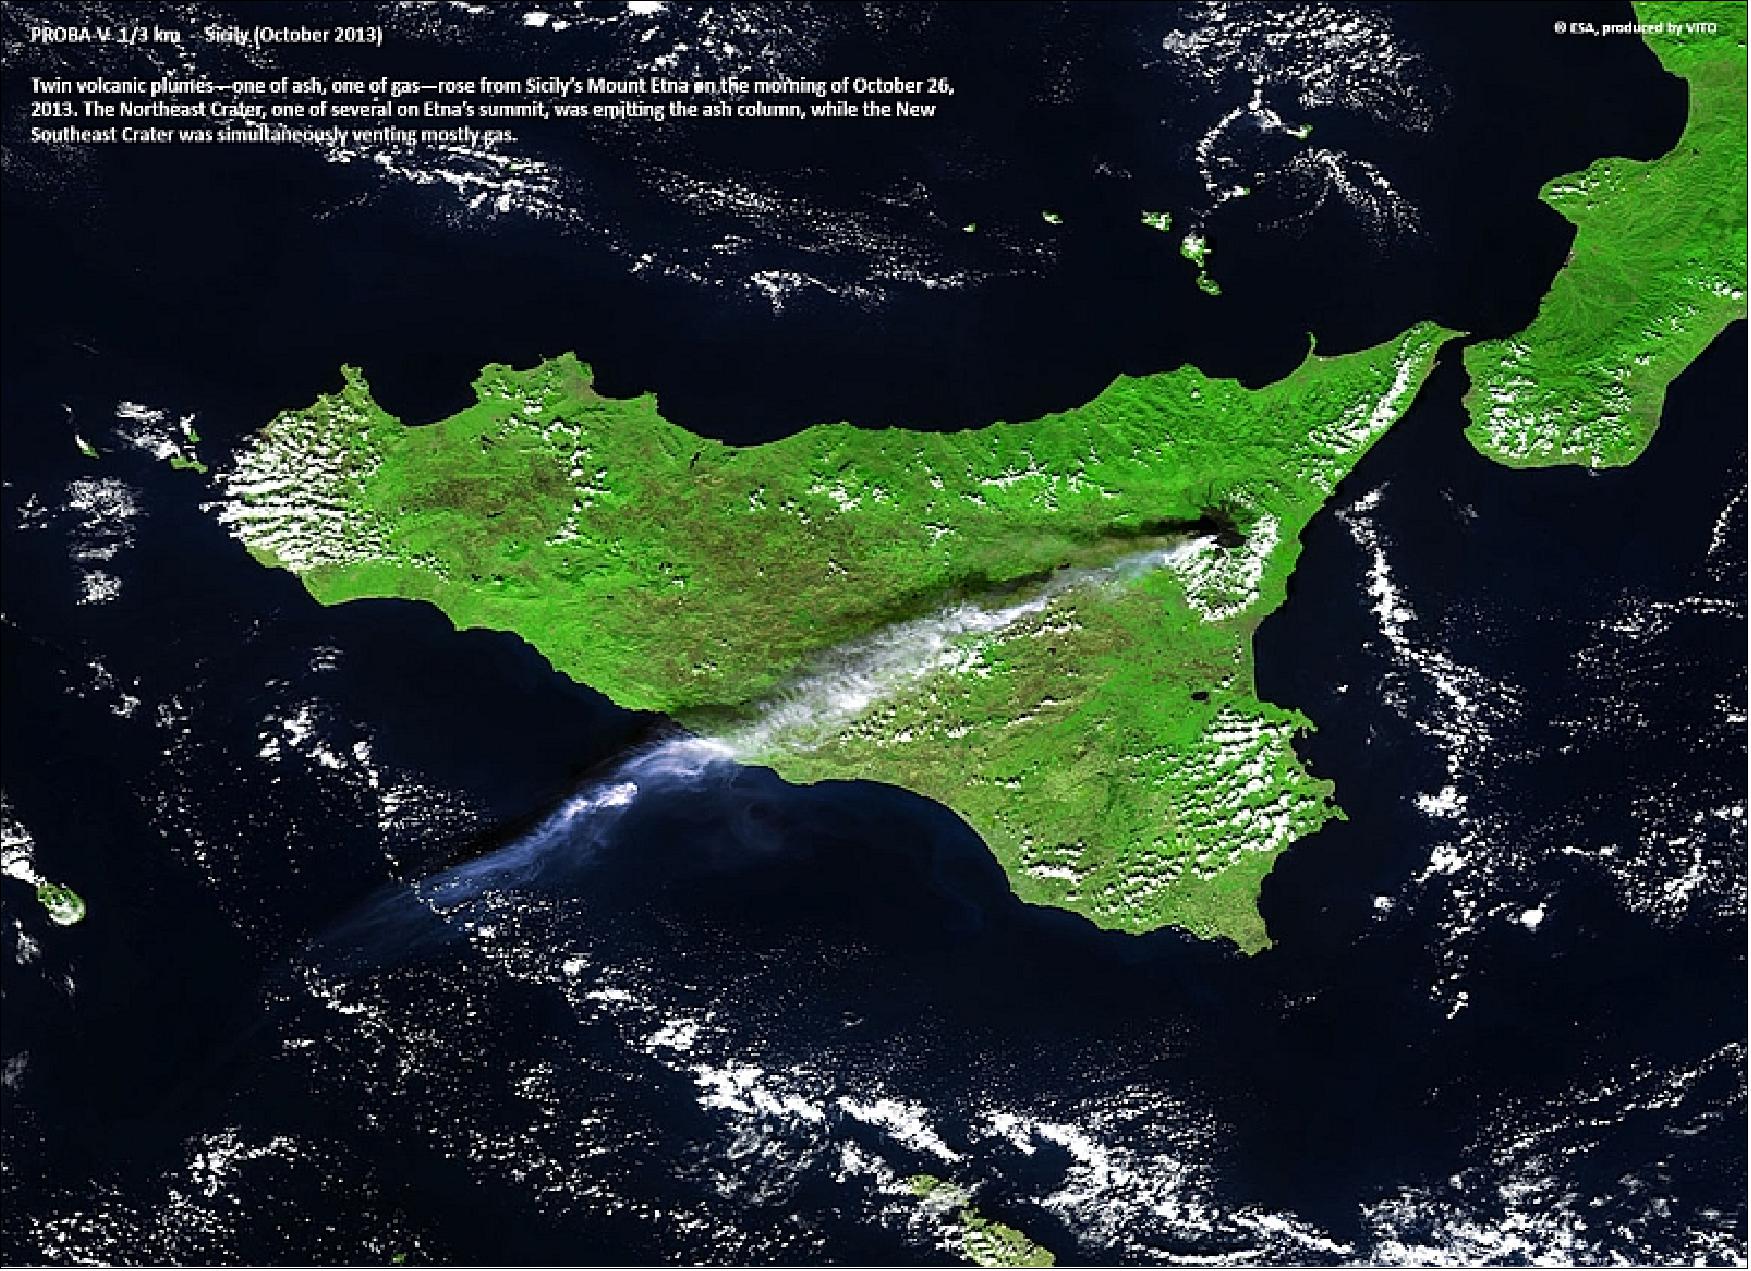 Figure 64: PROBA-V image acquired on Oct. 26, 2013, showing Sicily, Italy with the twin volcanic plumes – one ash, one gas – from Mt. Etna (image credit: ESA, BELSPO)